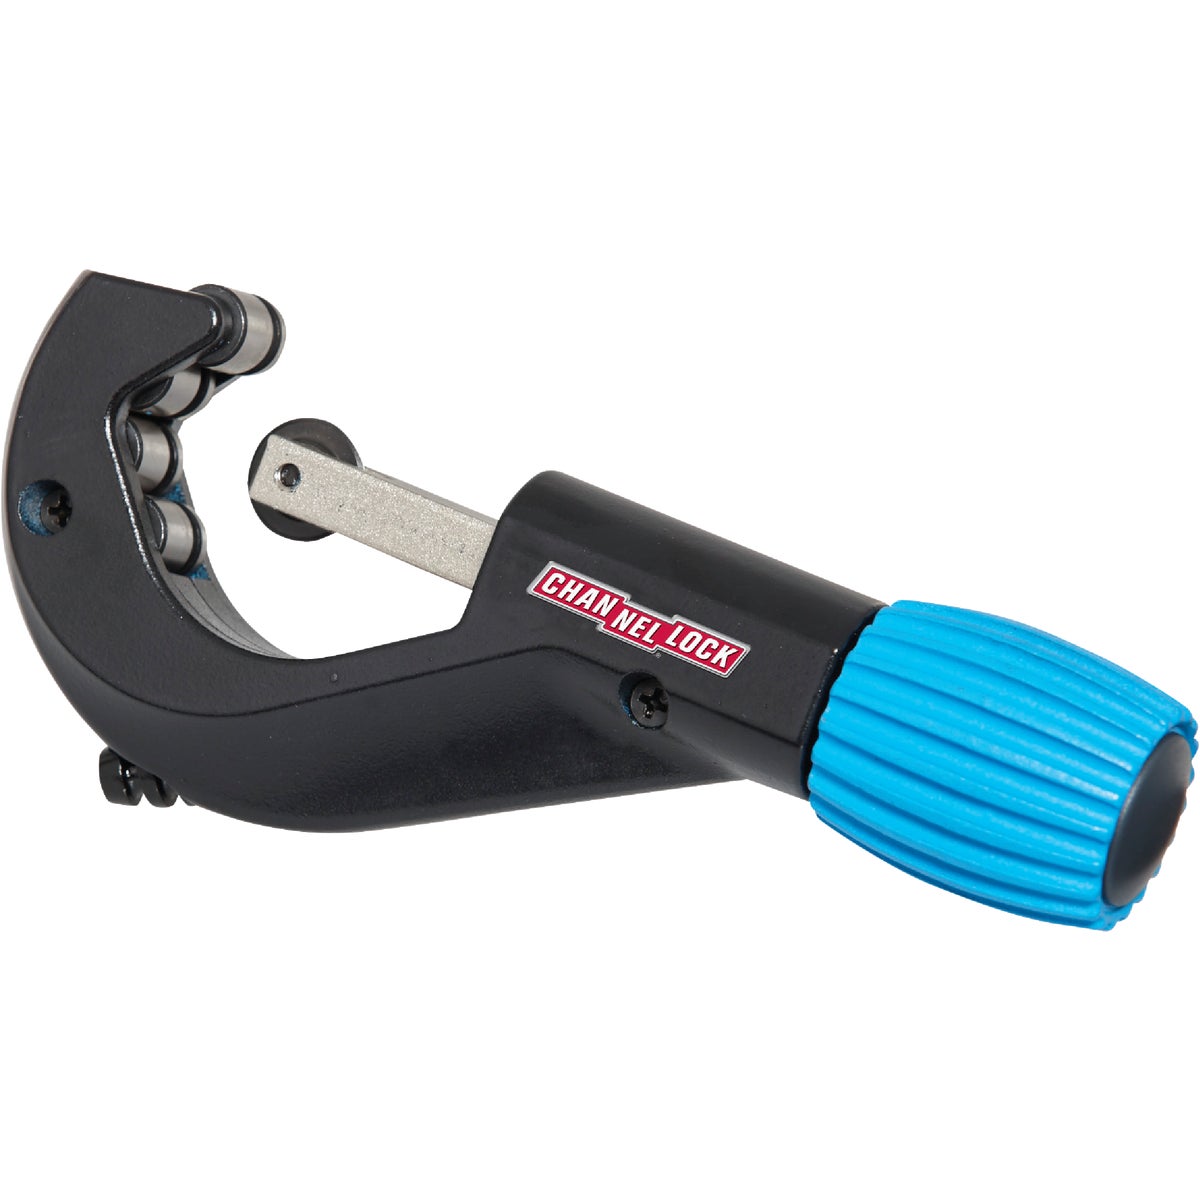 Channellock Up to 1-5/8 In. Copper, Aluminum or Stainless Steel Tubing Cutter